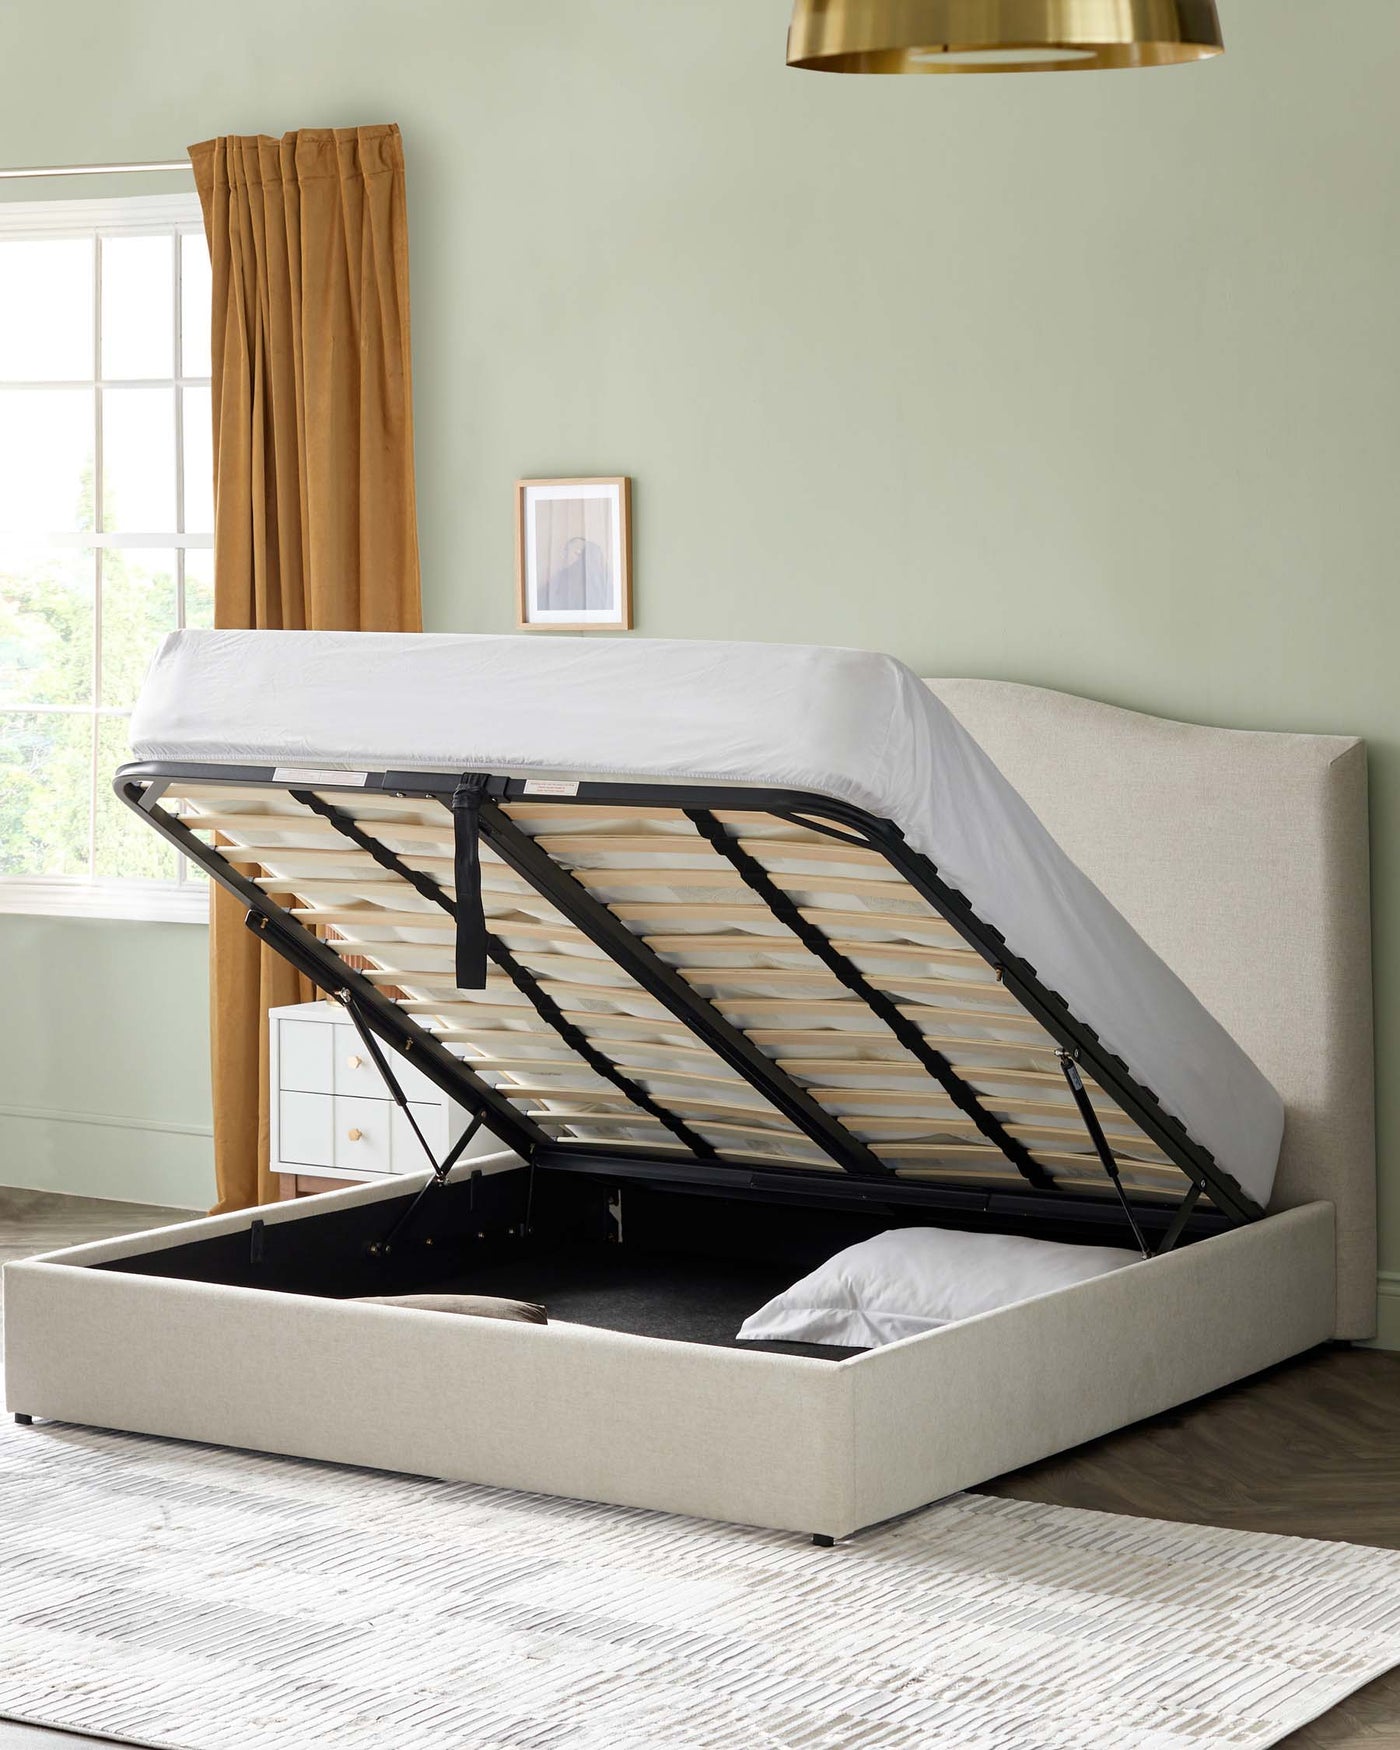 Beige upholstered storage bed with a gas-lift mechanism showcasing the under-bed storage area and a slatted bed base, partially covered with a white sheet, in a room with a green wall and wooden flooring.